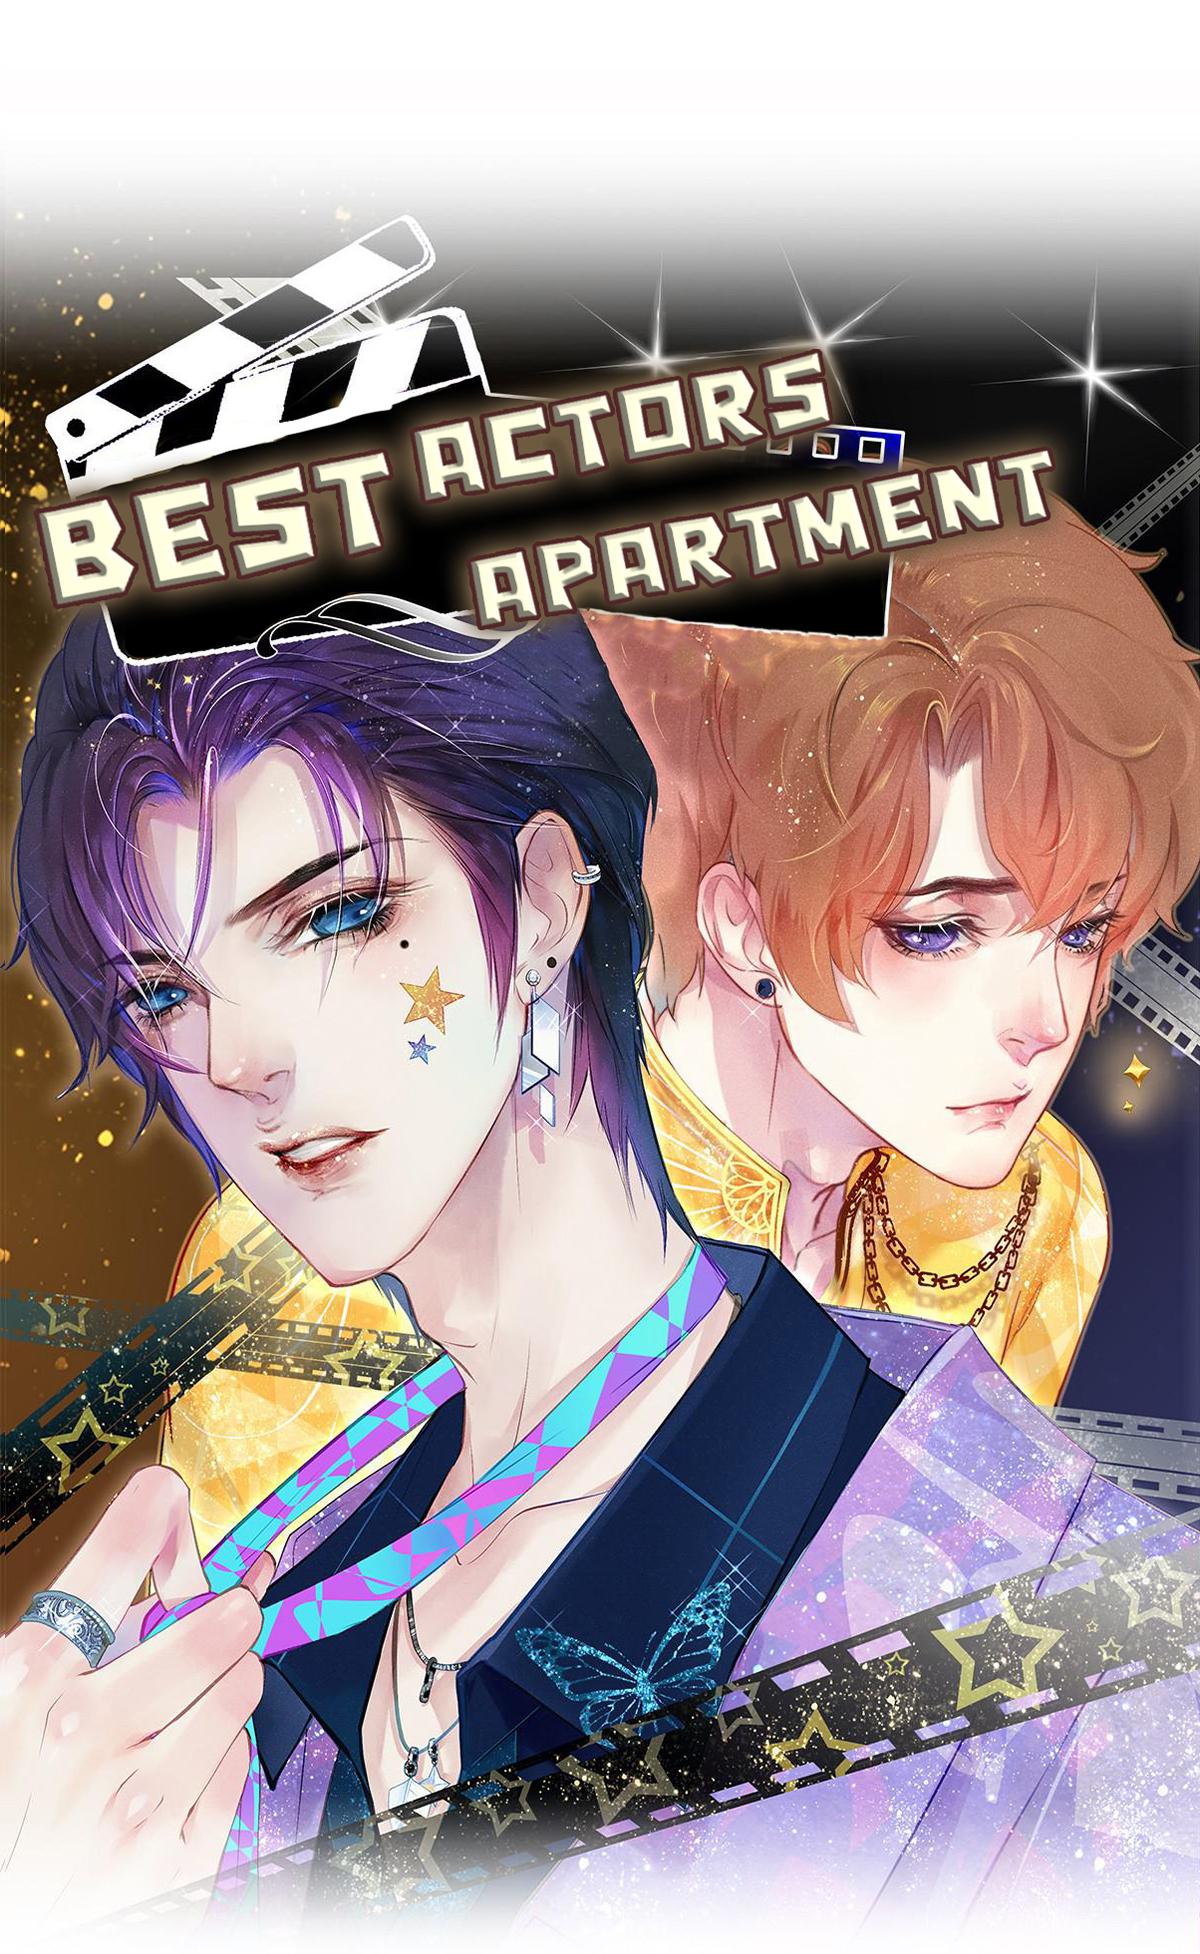 Best Actors Apartment Vol.1 Chapter 17.0: The Scenery By The Lake Is Breathtaking - Picture 1